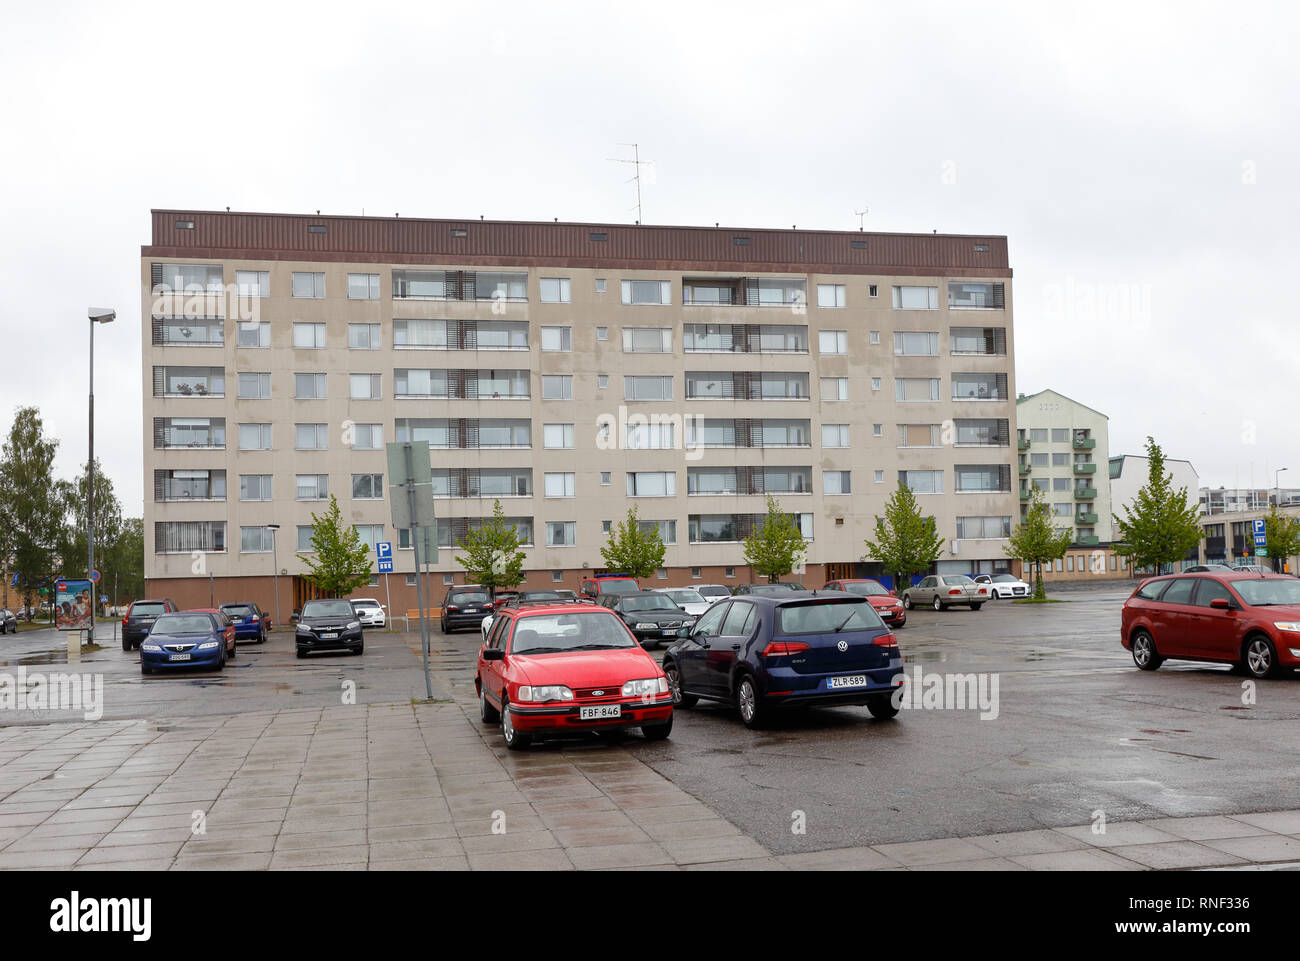 Kemi. Finland - June 19, 2018: Exterial view of a multi-storey multi-family residential building with a parking space in front of it. Stock Photo